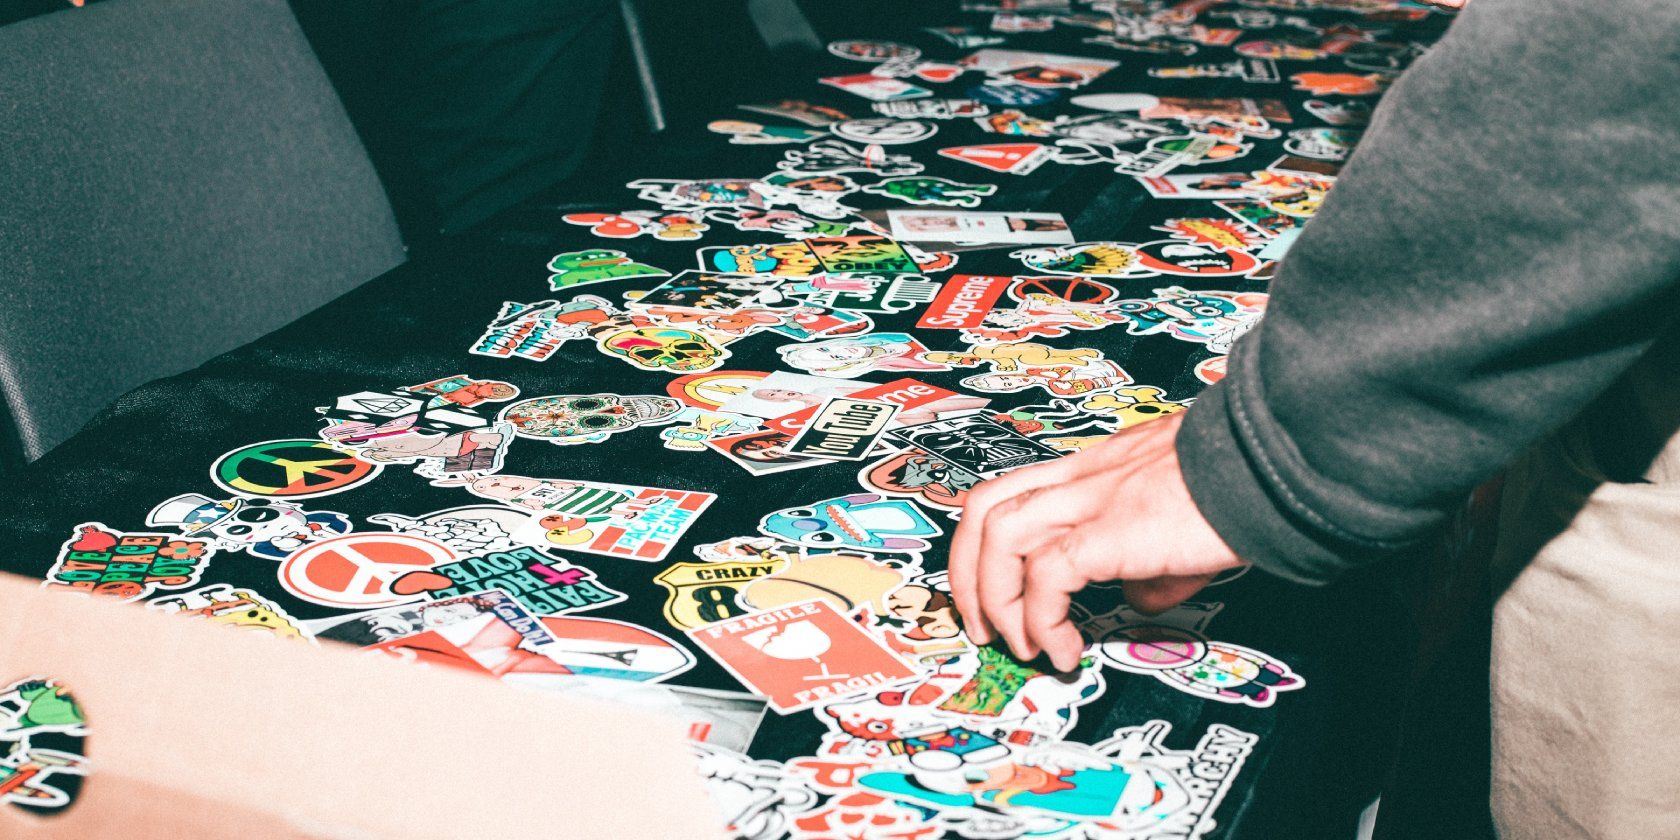 Photo Showing a Variety of Stickers on a Table